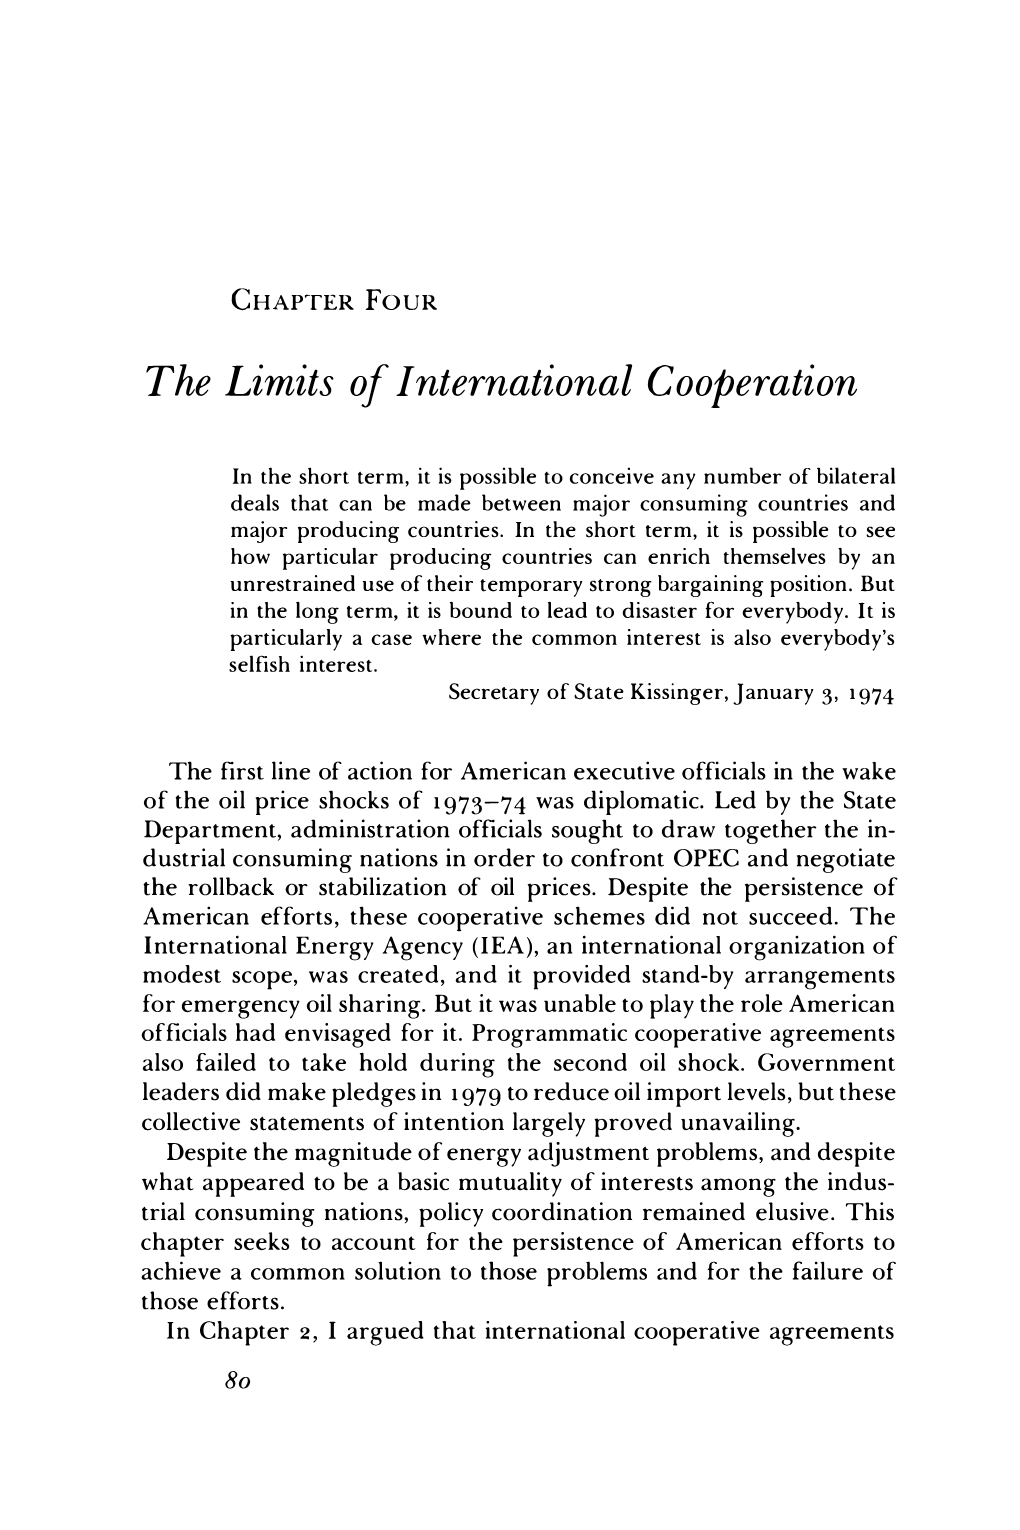 The Limits of International Cooperation